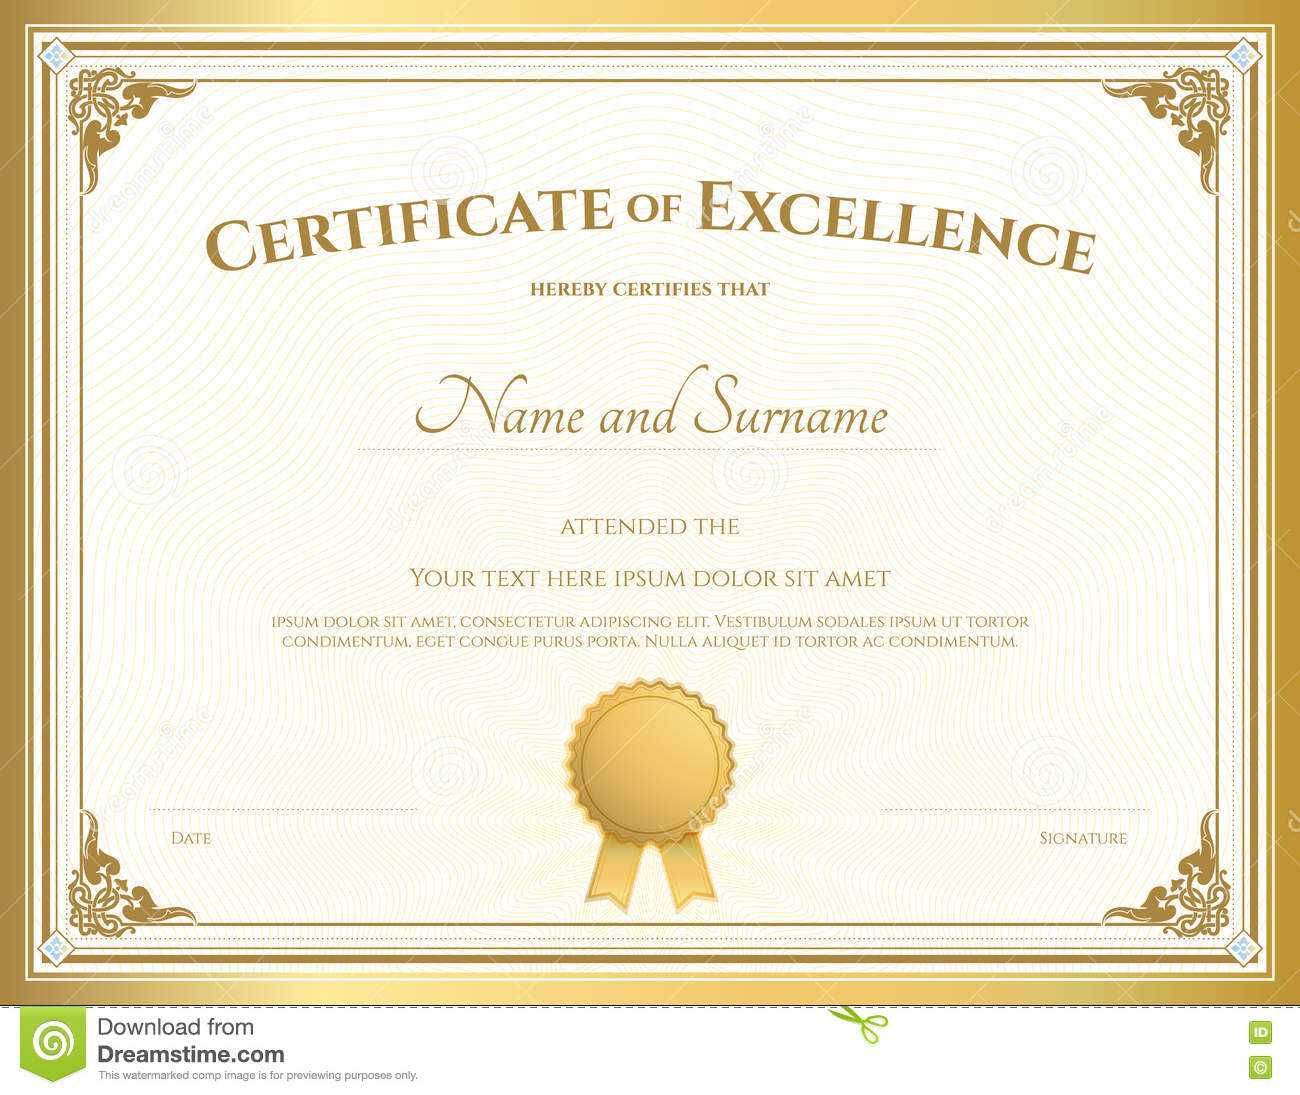 Certificate Of Excellence Template With Gold Border Stock Within Certificate Of Excellence Template Free Download